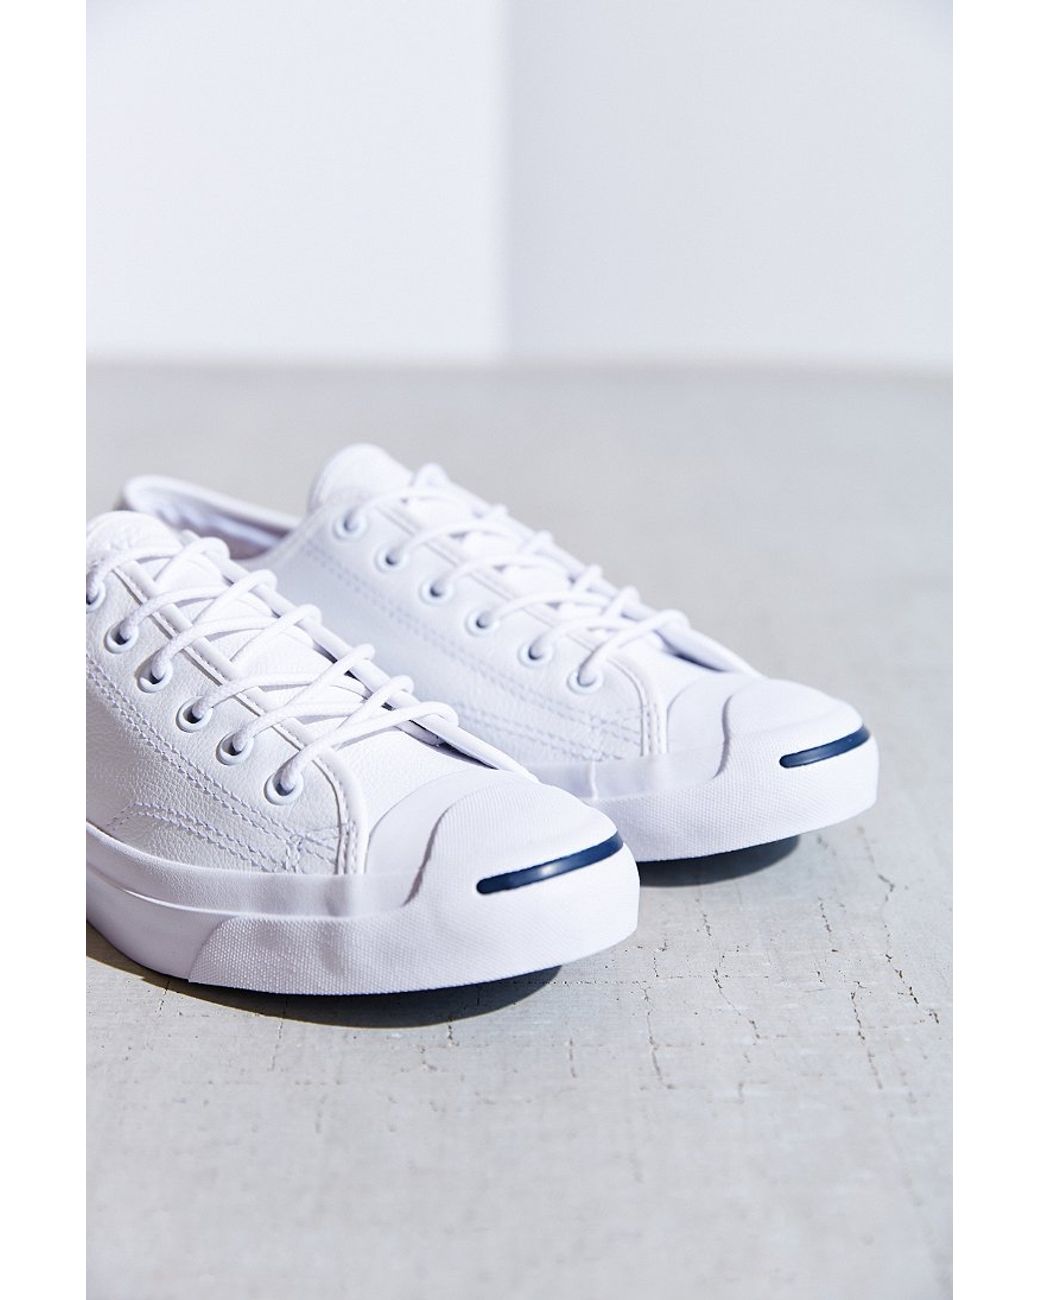 Converse Purcell Tumbled Low-Top Sneaker in White Lyst Canada